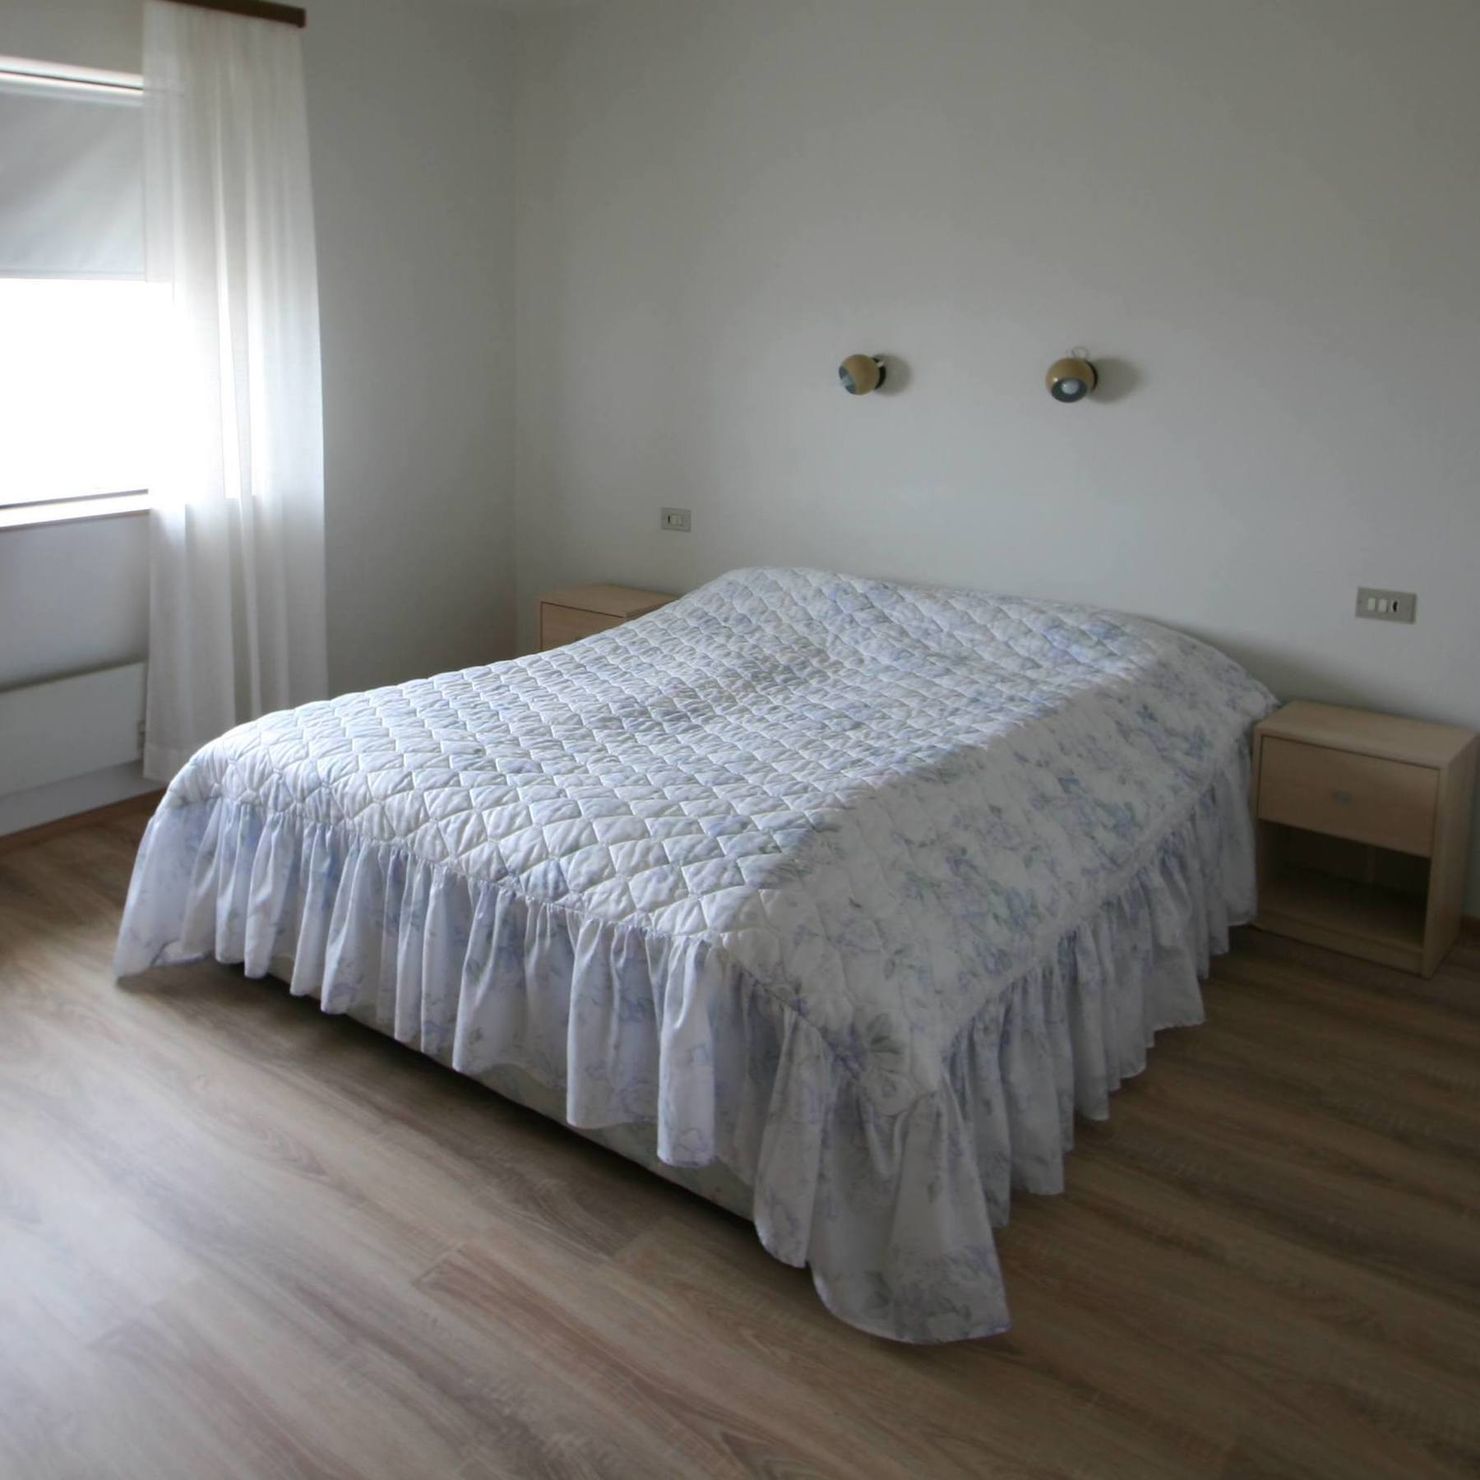 Very spacious bedroom with large double bed, wardrobe and window